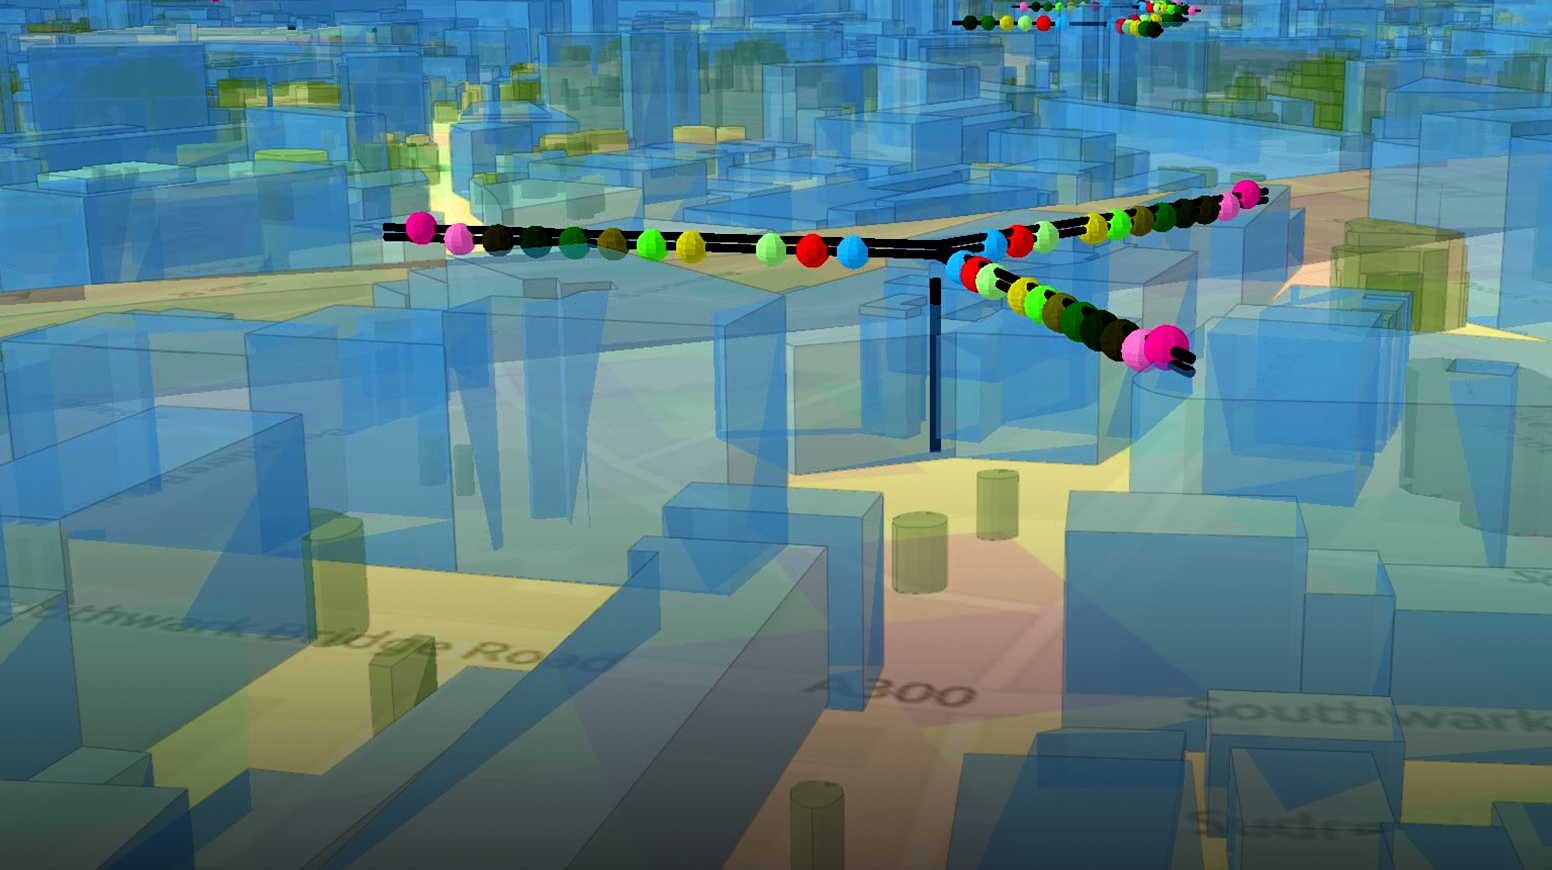 Signal propagation modeling in Vodaphone’s digital twin being used to tune the signal to the neighborhood and user demand